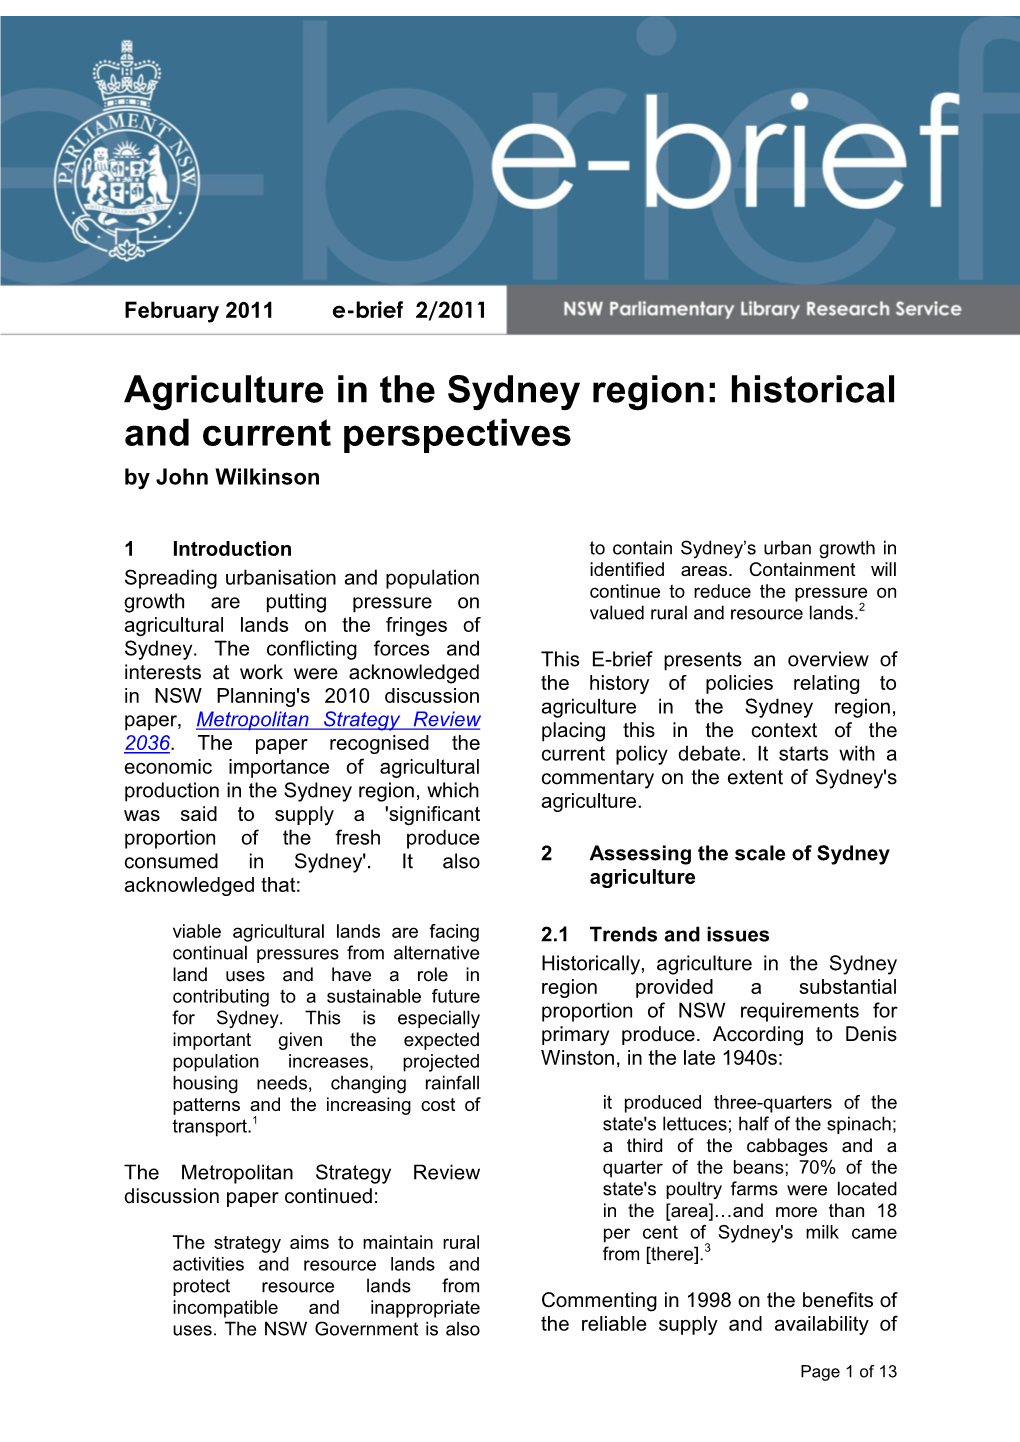 Agriculture in the Sydney Region: Historical and Current Perspectives by John Wilkinson